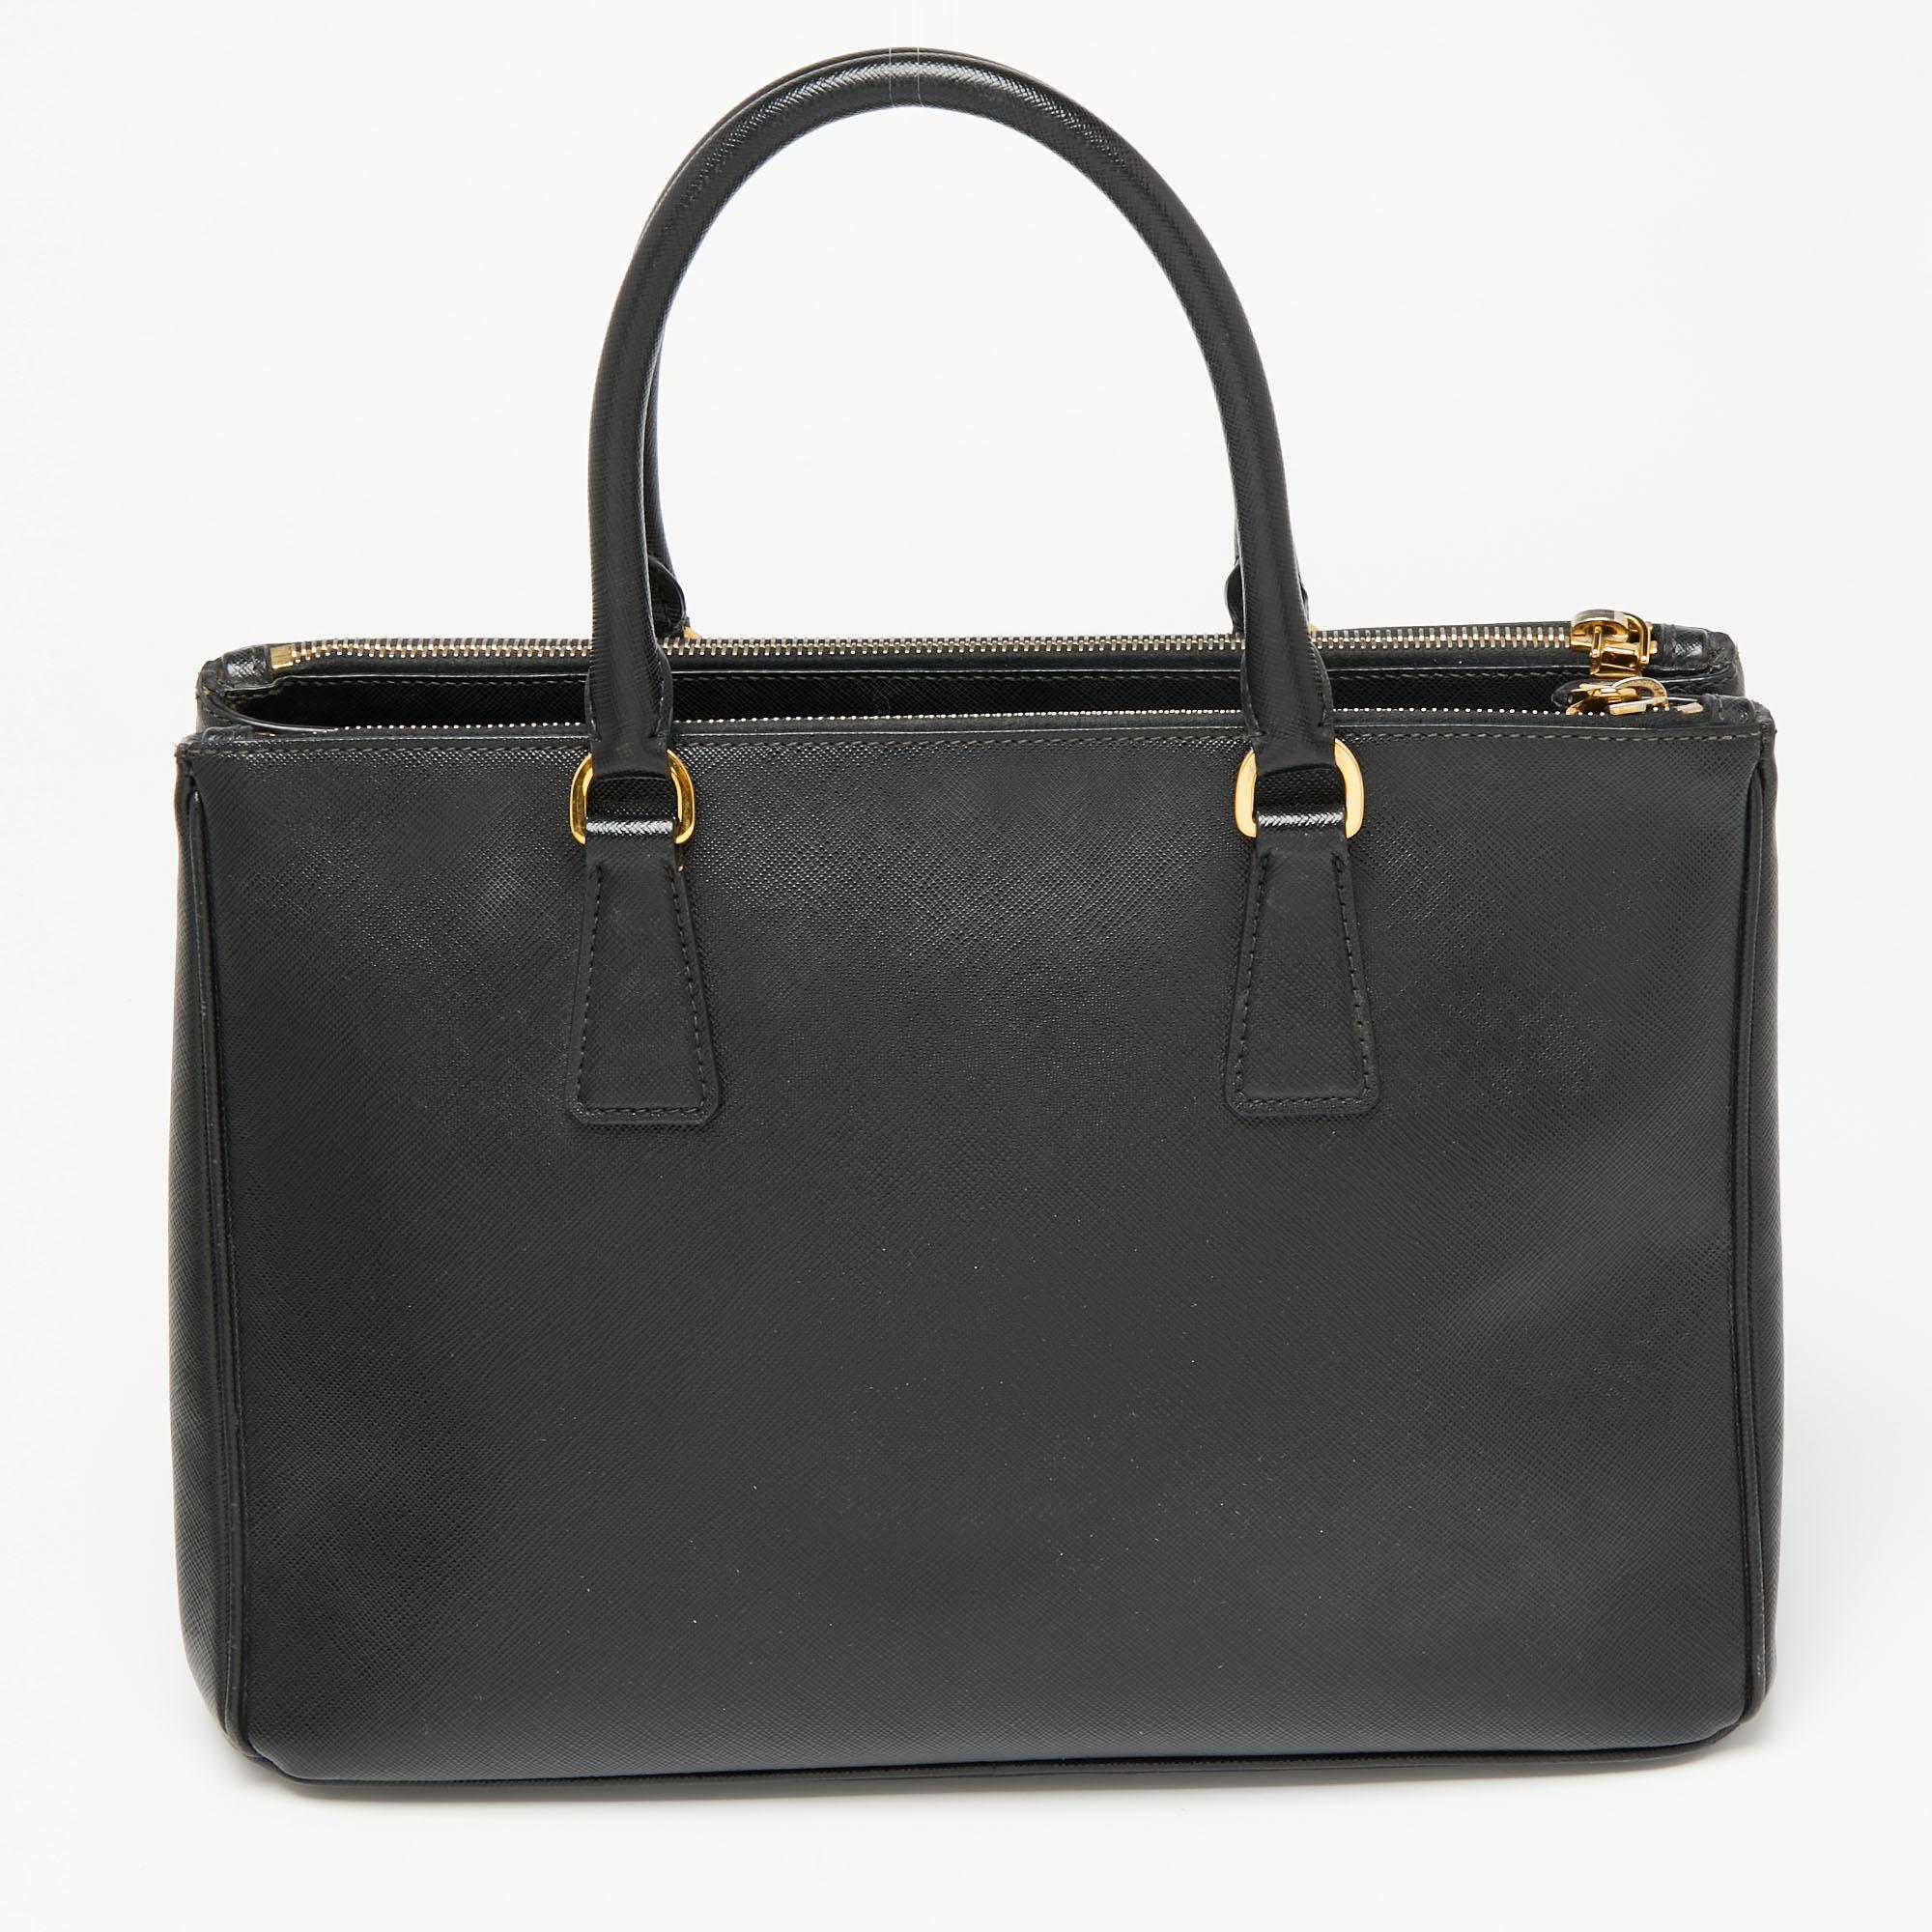 Feminine in shape and grand in design, this Double Zip tote by Prada will be a loved addition to your closet. It has been crafted from Saffiano leather and styled minimally with gold tone hardware. It comes with two top handles, two zip